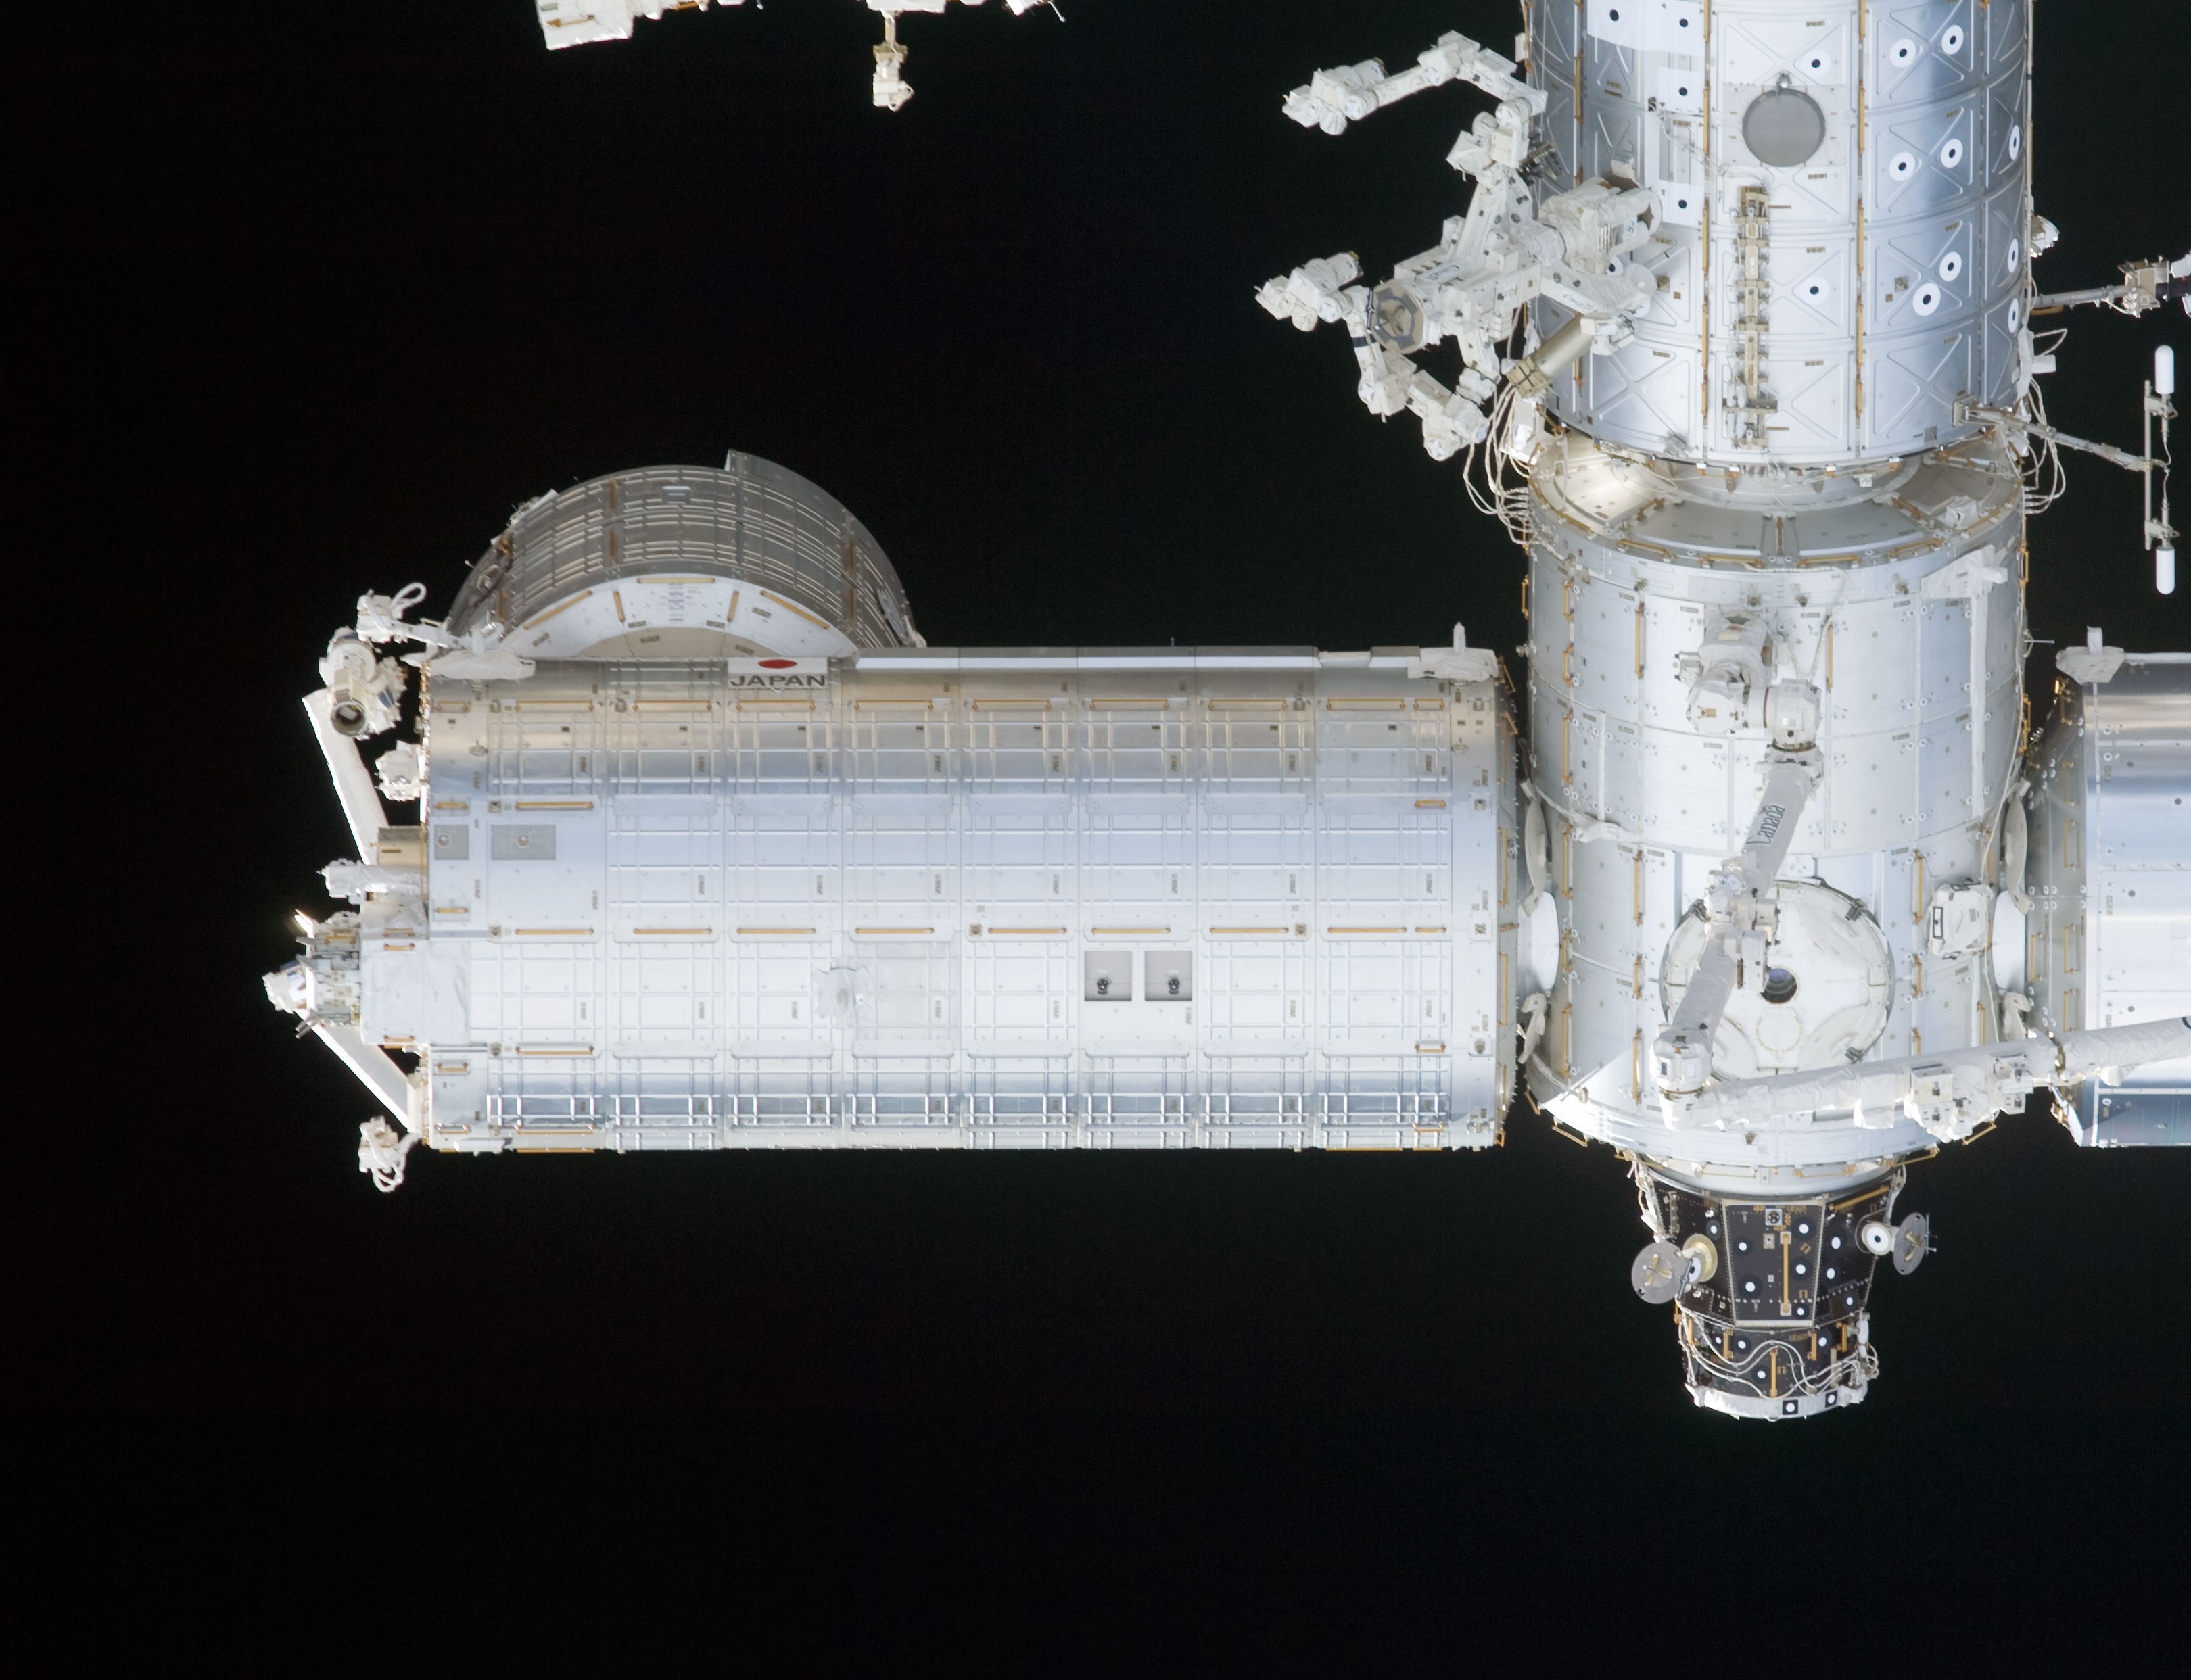 Close up of the Kibo Japanese Experiment Module - the astronauts attached the Exposed Facility at the left end of the module